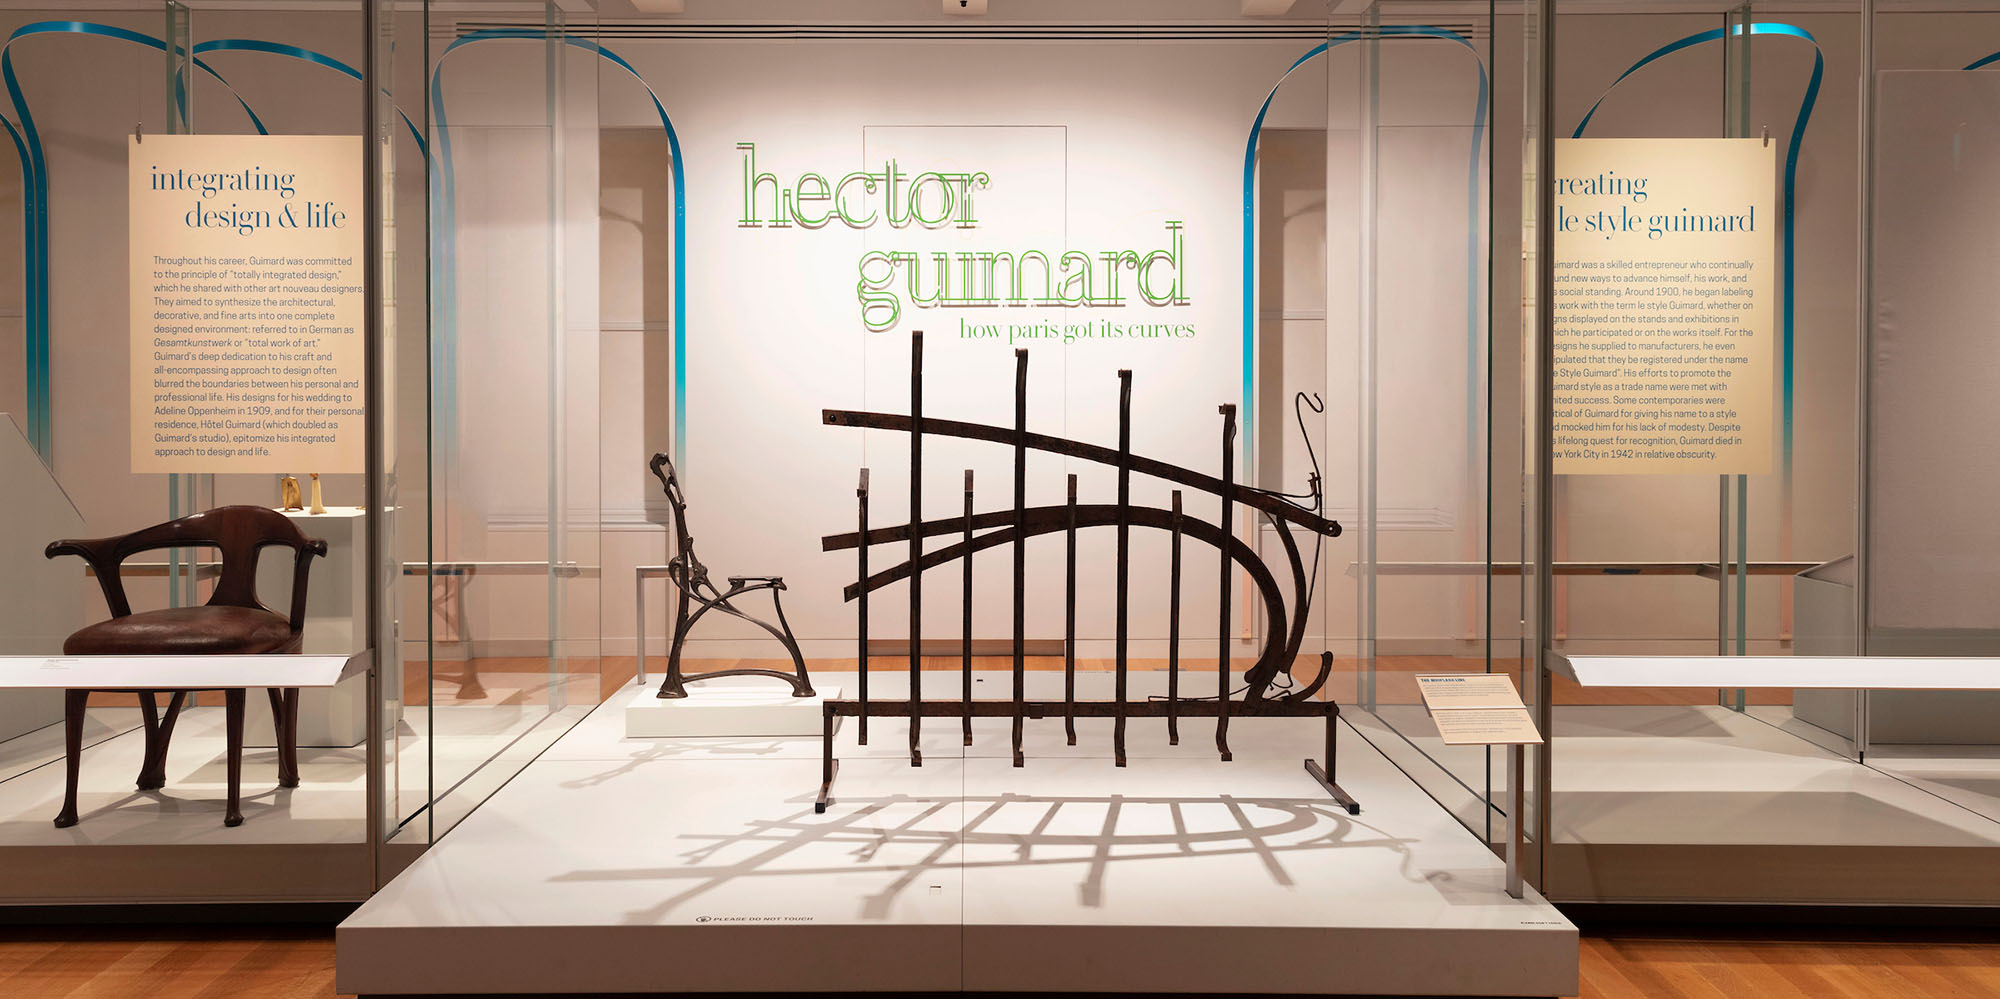 Installation view of "Hector Guimard" exhibition with large iron brackets on display in center platform, alongside an armchair in a glass vitrine.